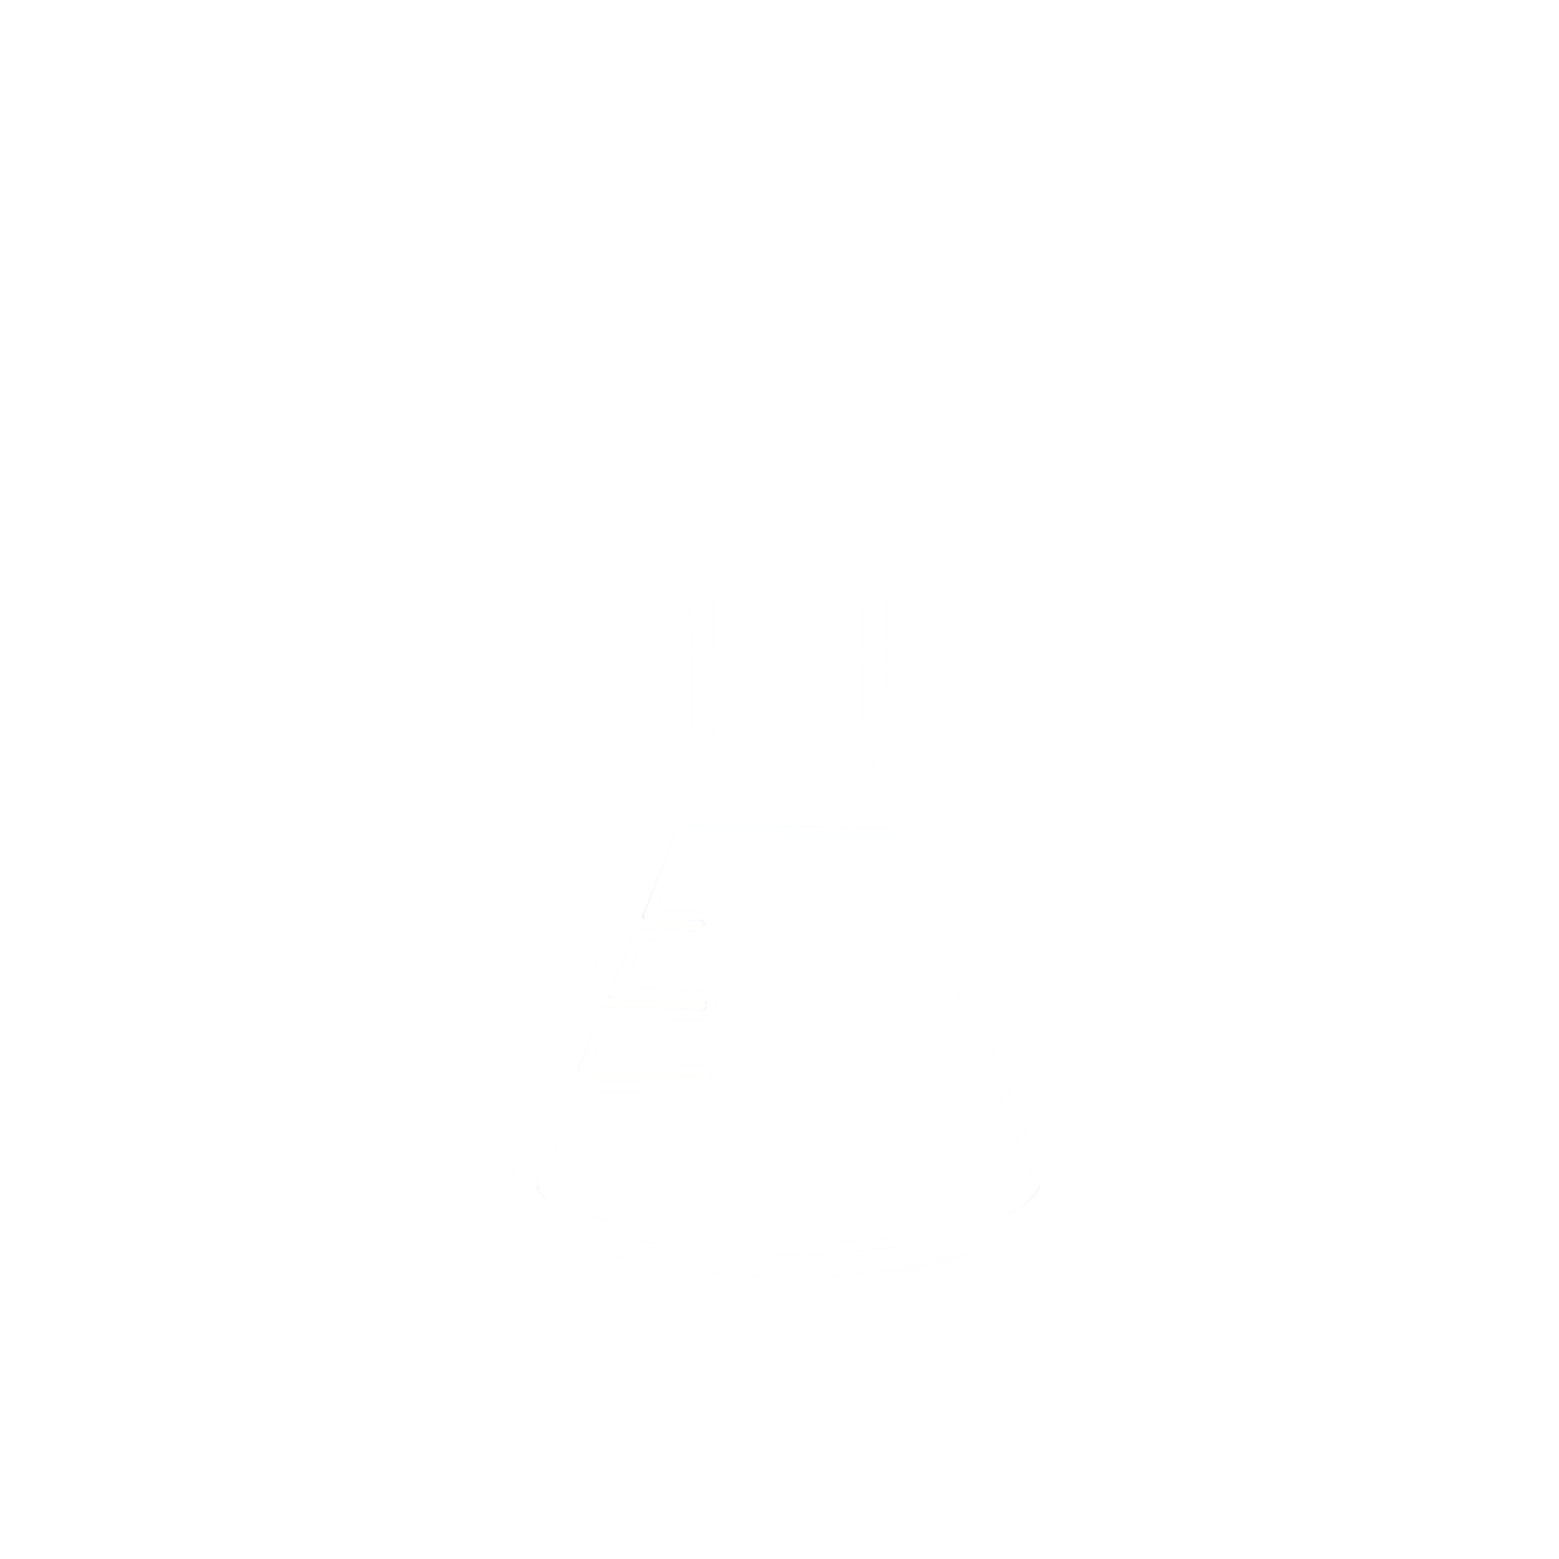 conical flask